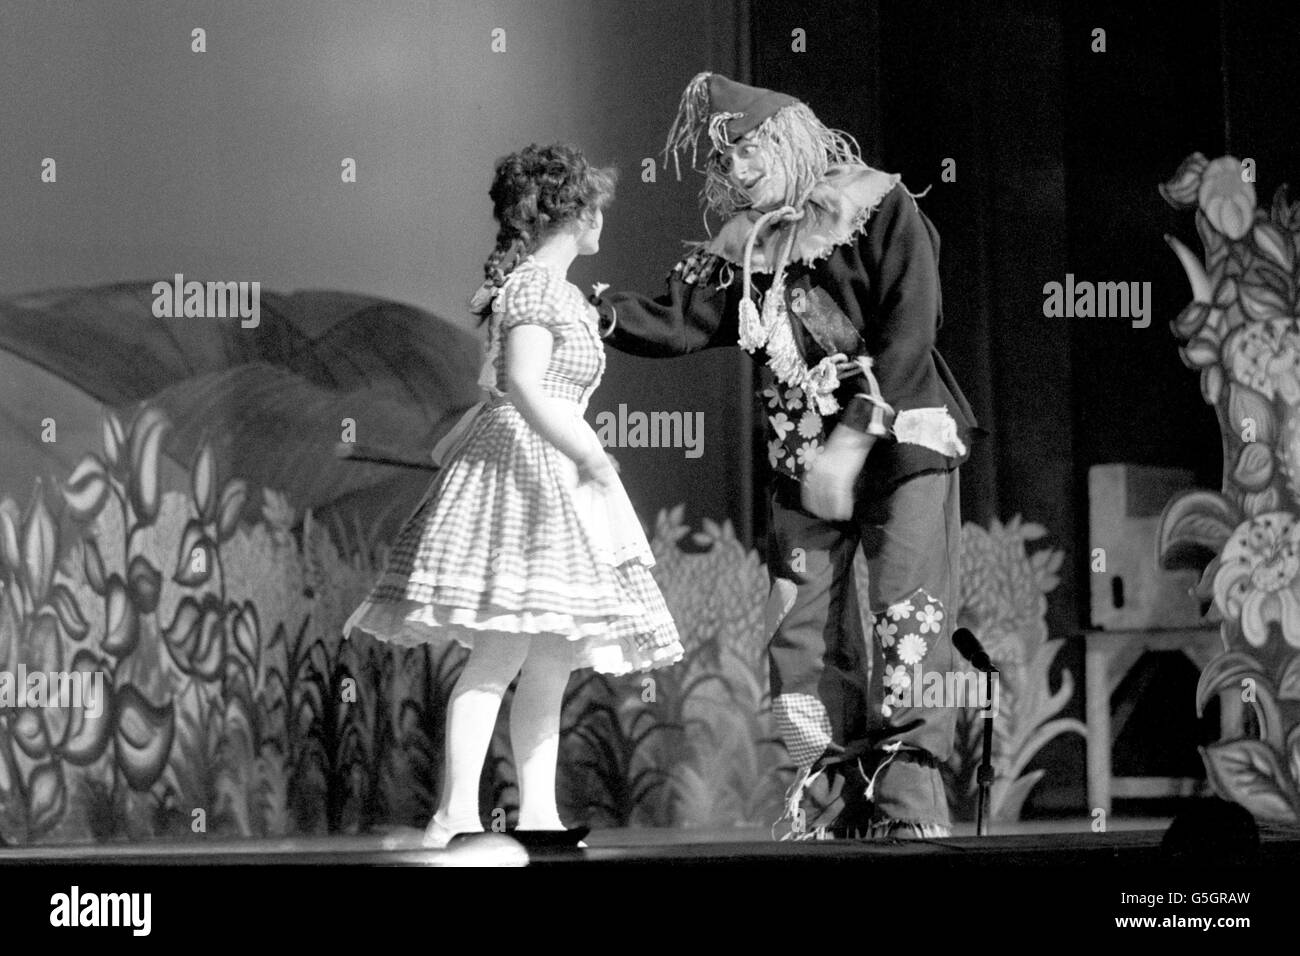 John Clive, playing as The Scarecrow, and Deborah Watling, as Dorothy, perform in a dress rehearsal of the Wizard of Oz, which opens at the Victoria Palace. Stock Photo